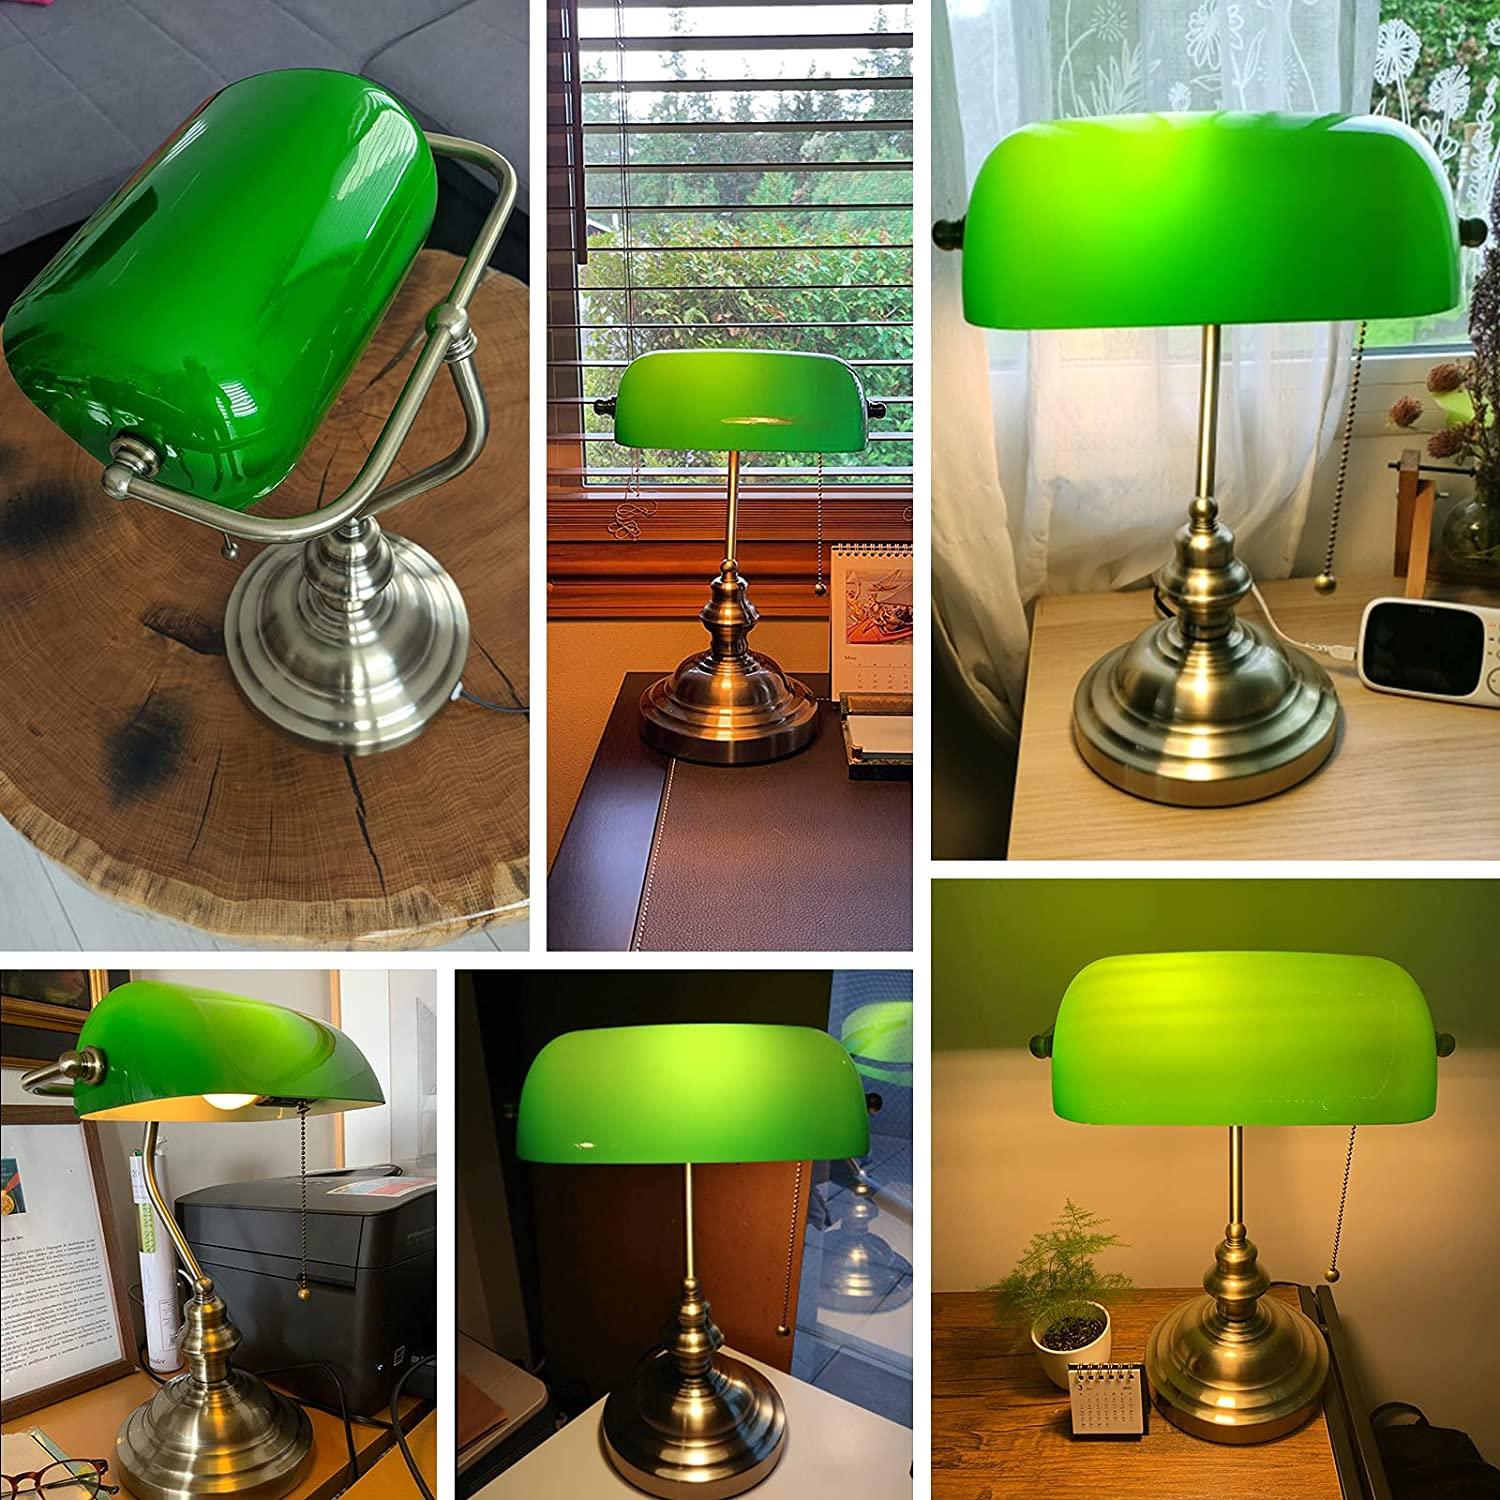 Retro Zipper Switch Banker Table Lamp, Bankers Lamp Table Green